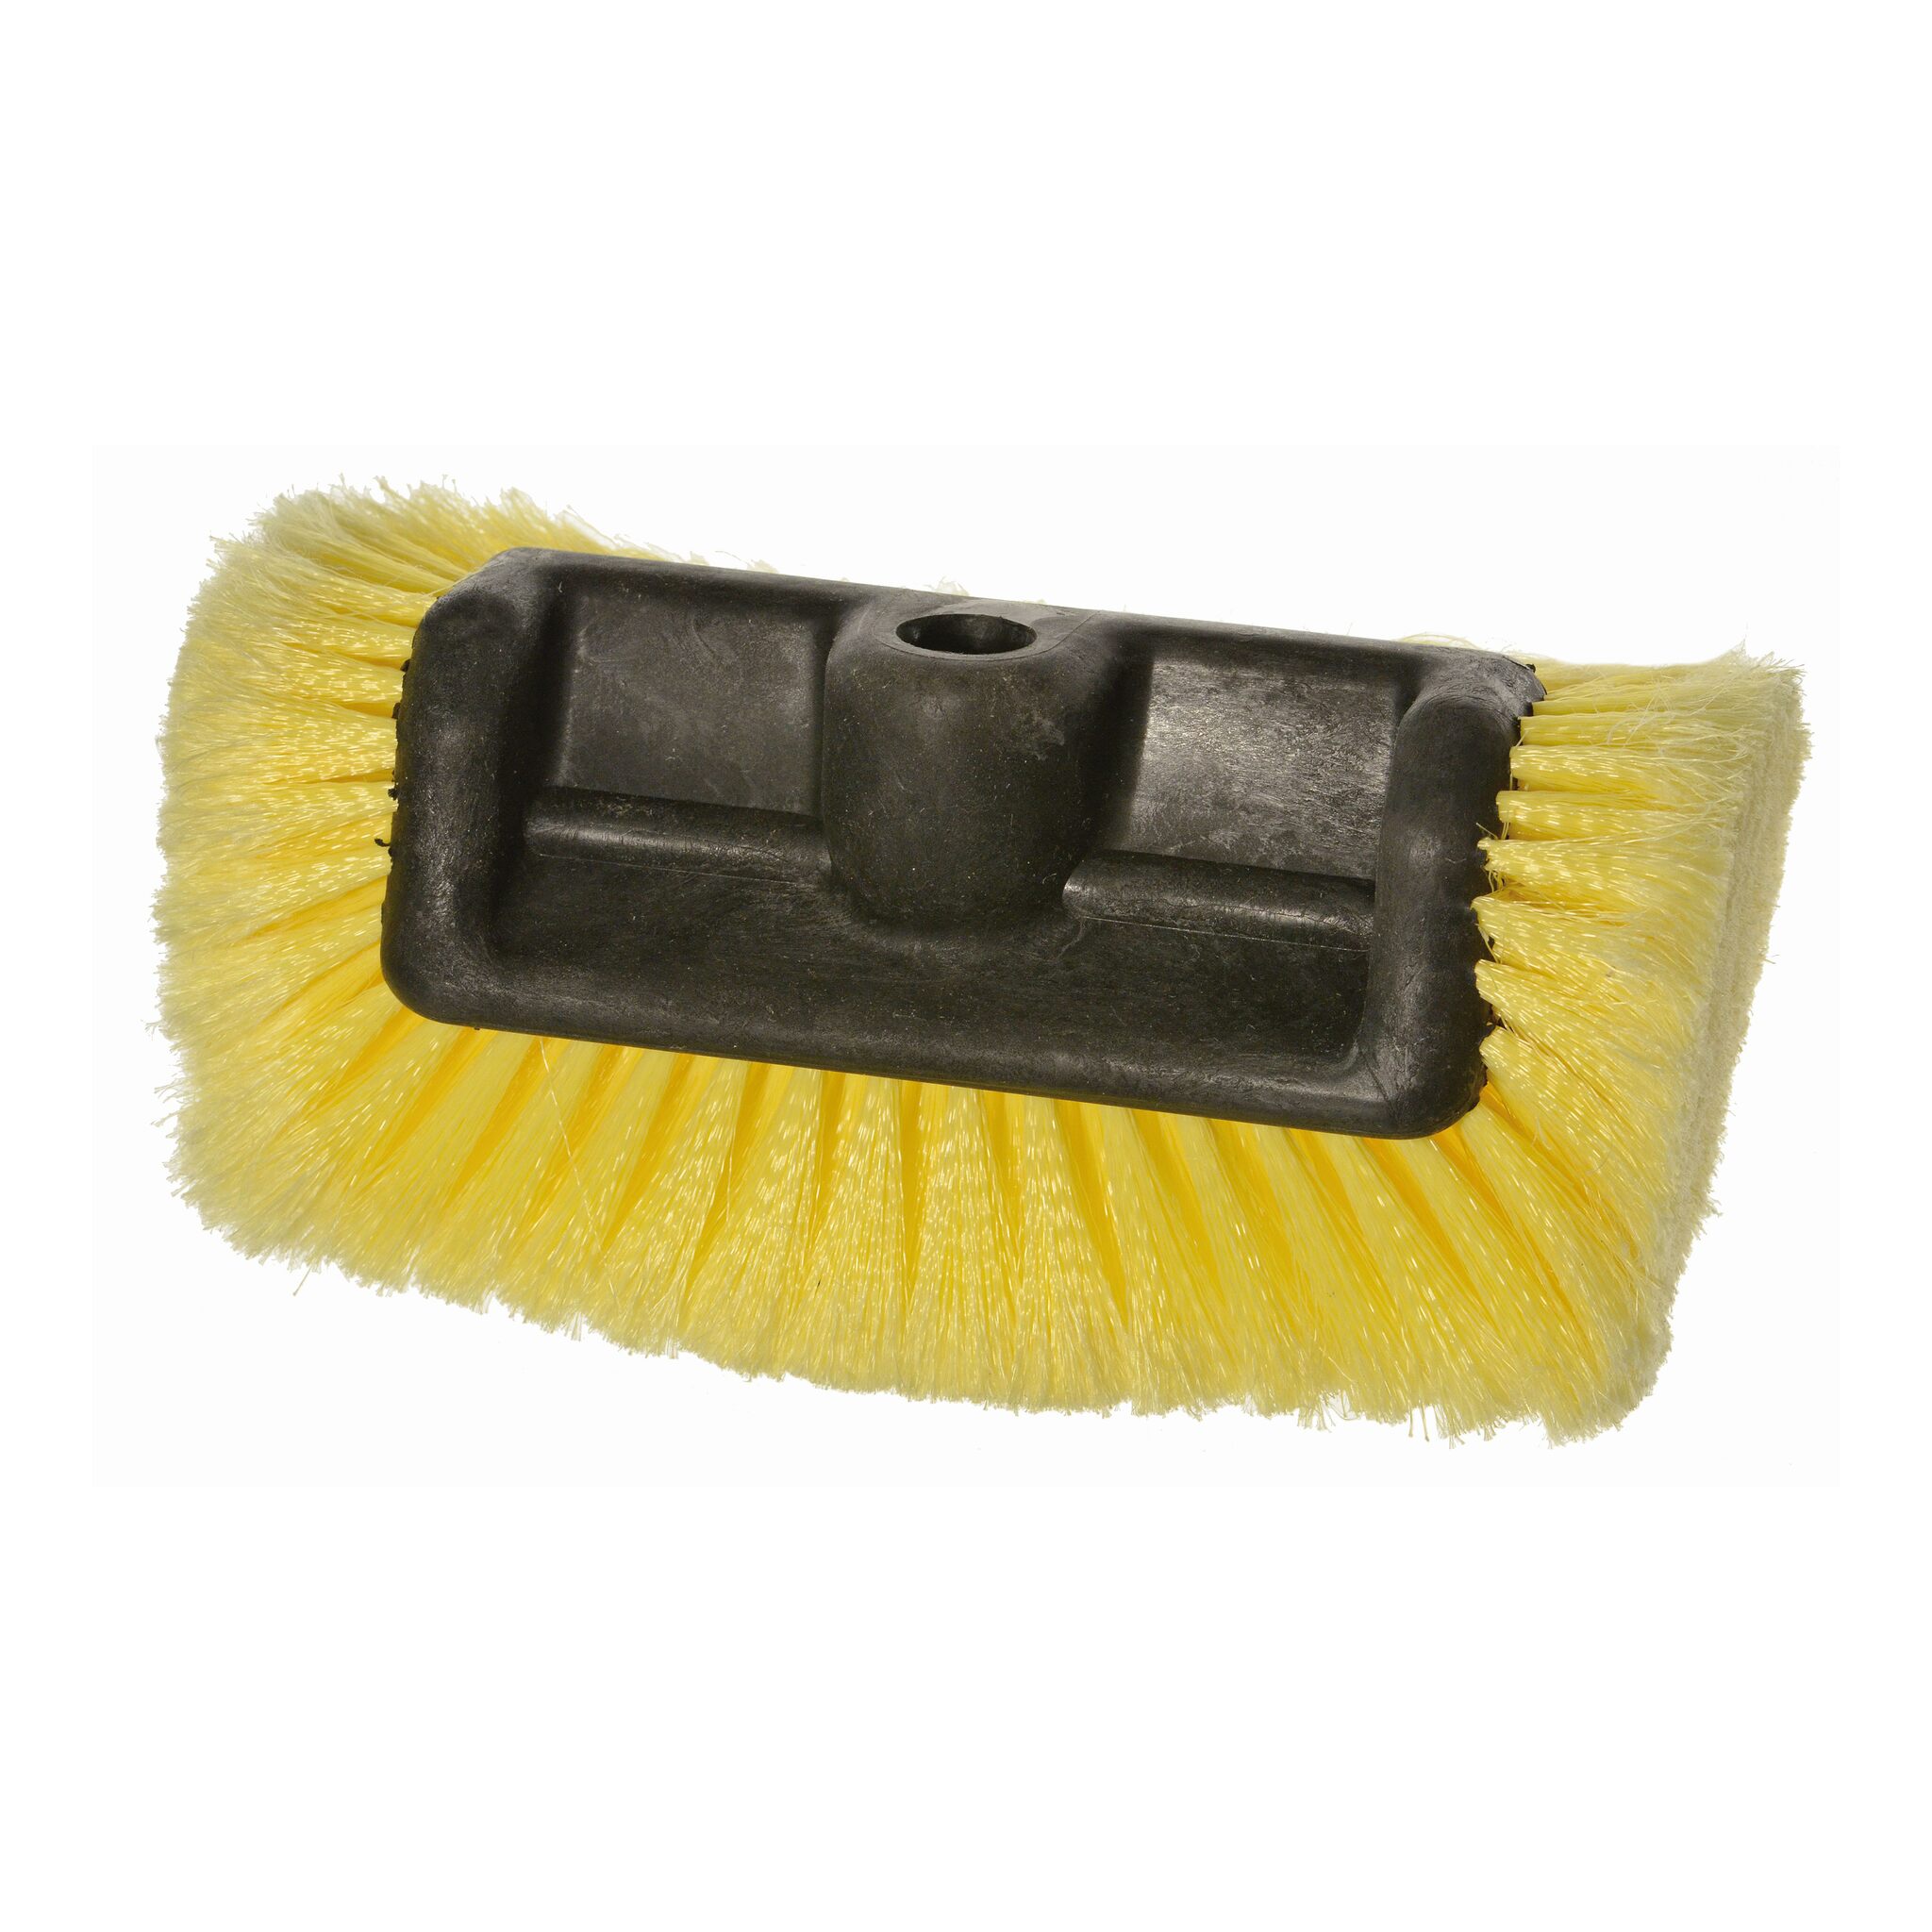 Yachticon replacement brush head with side brushes